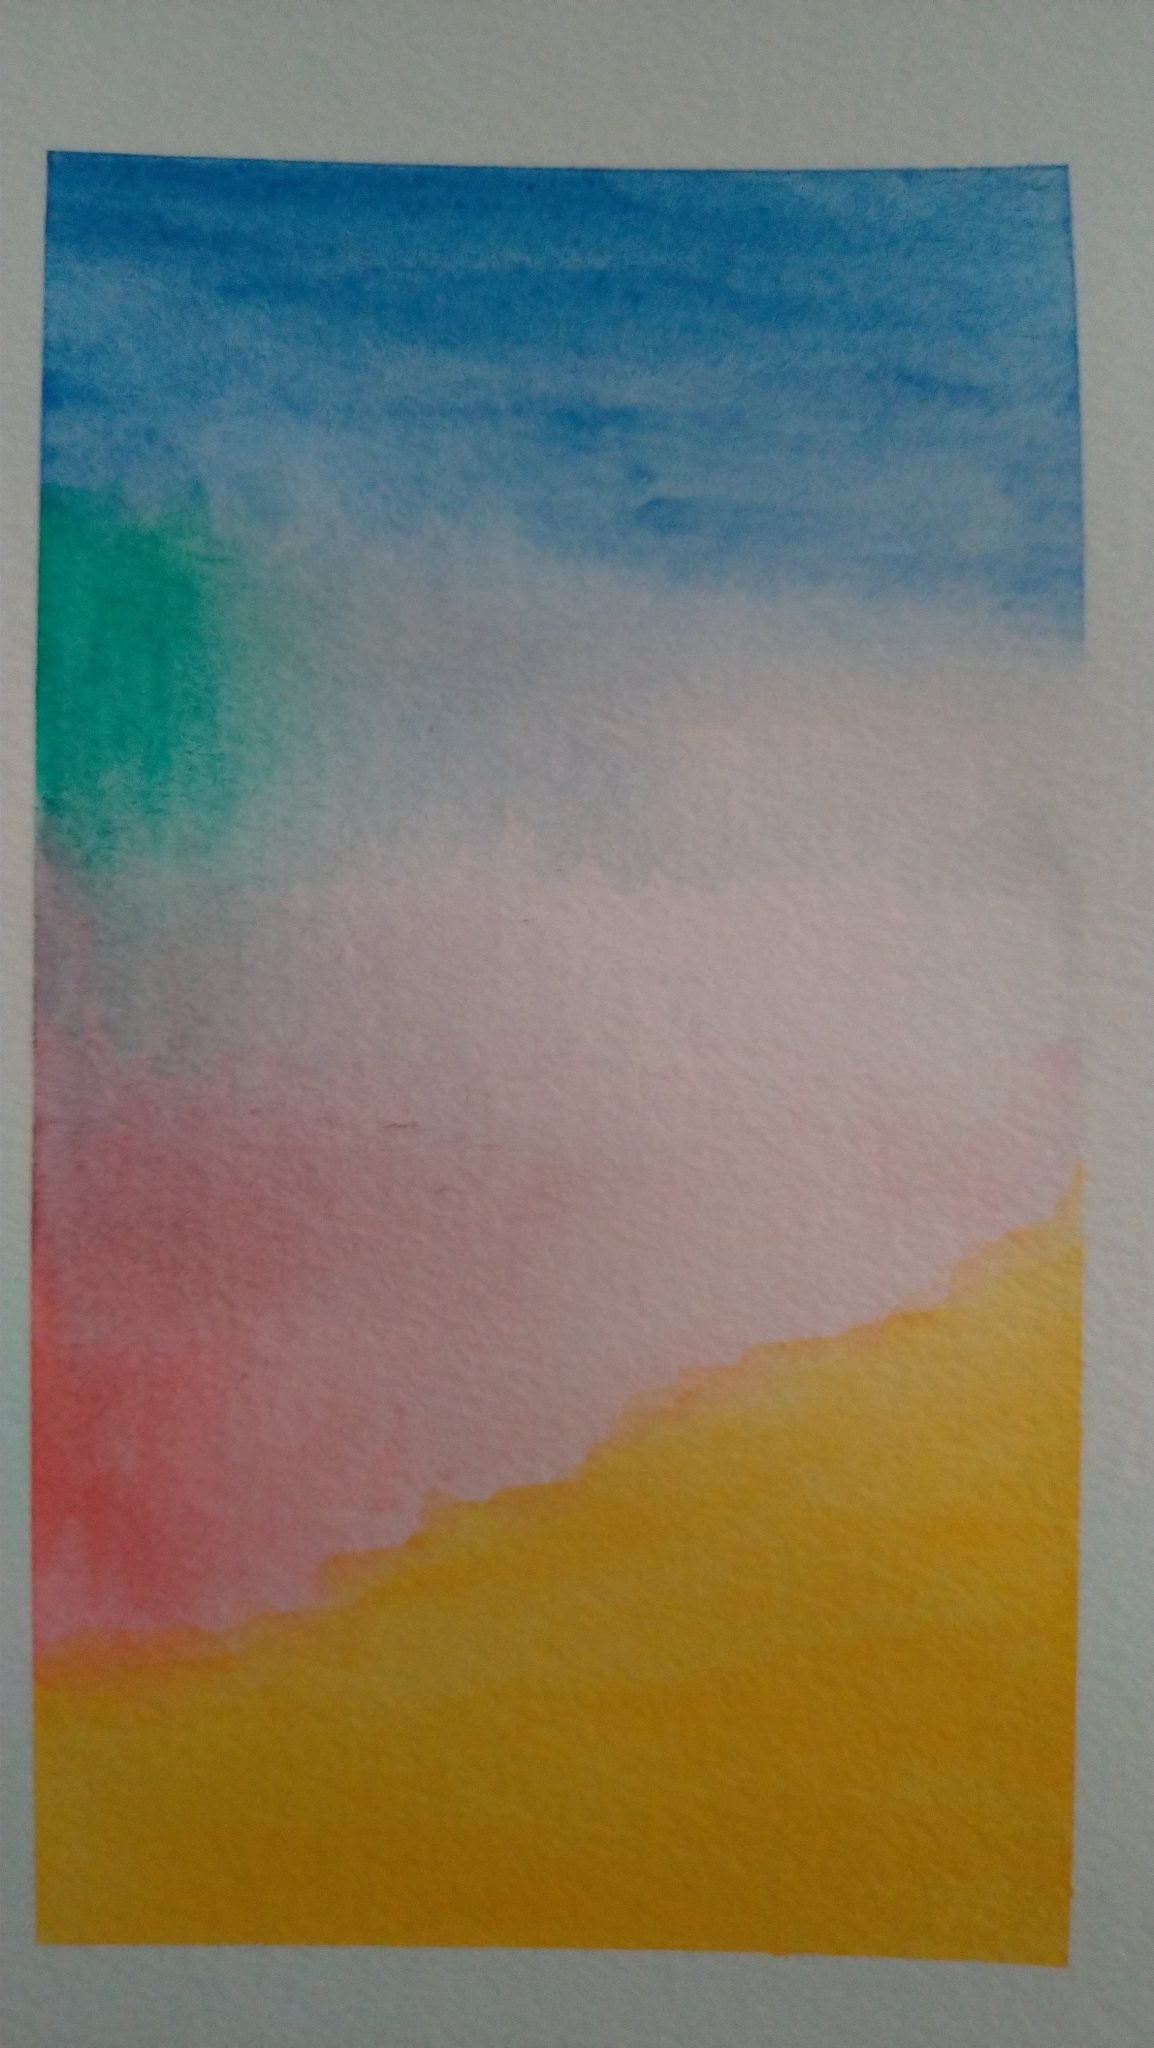 blues, greens, pinks and yellows bleed and blend on a page in a rectangle